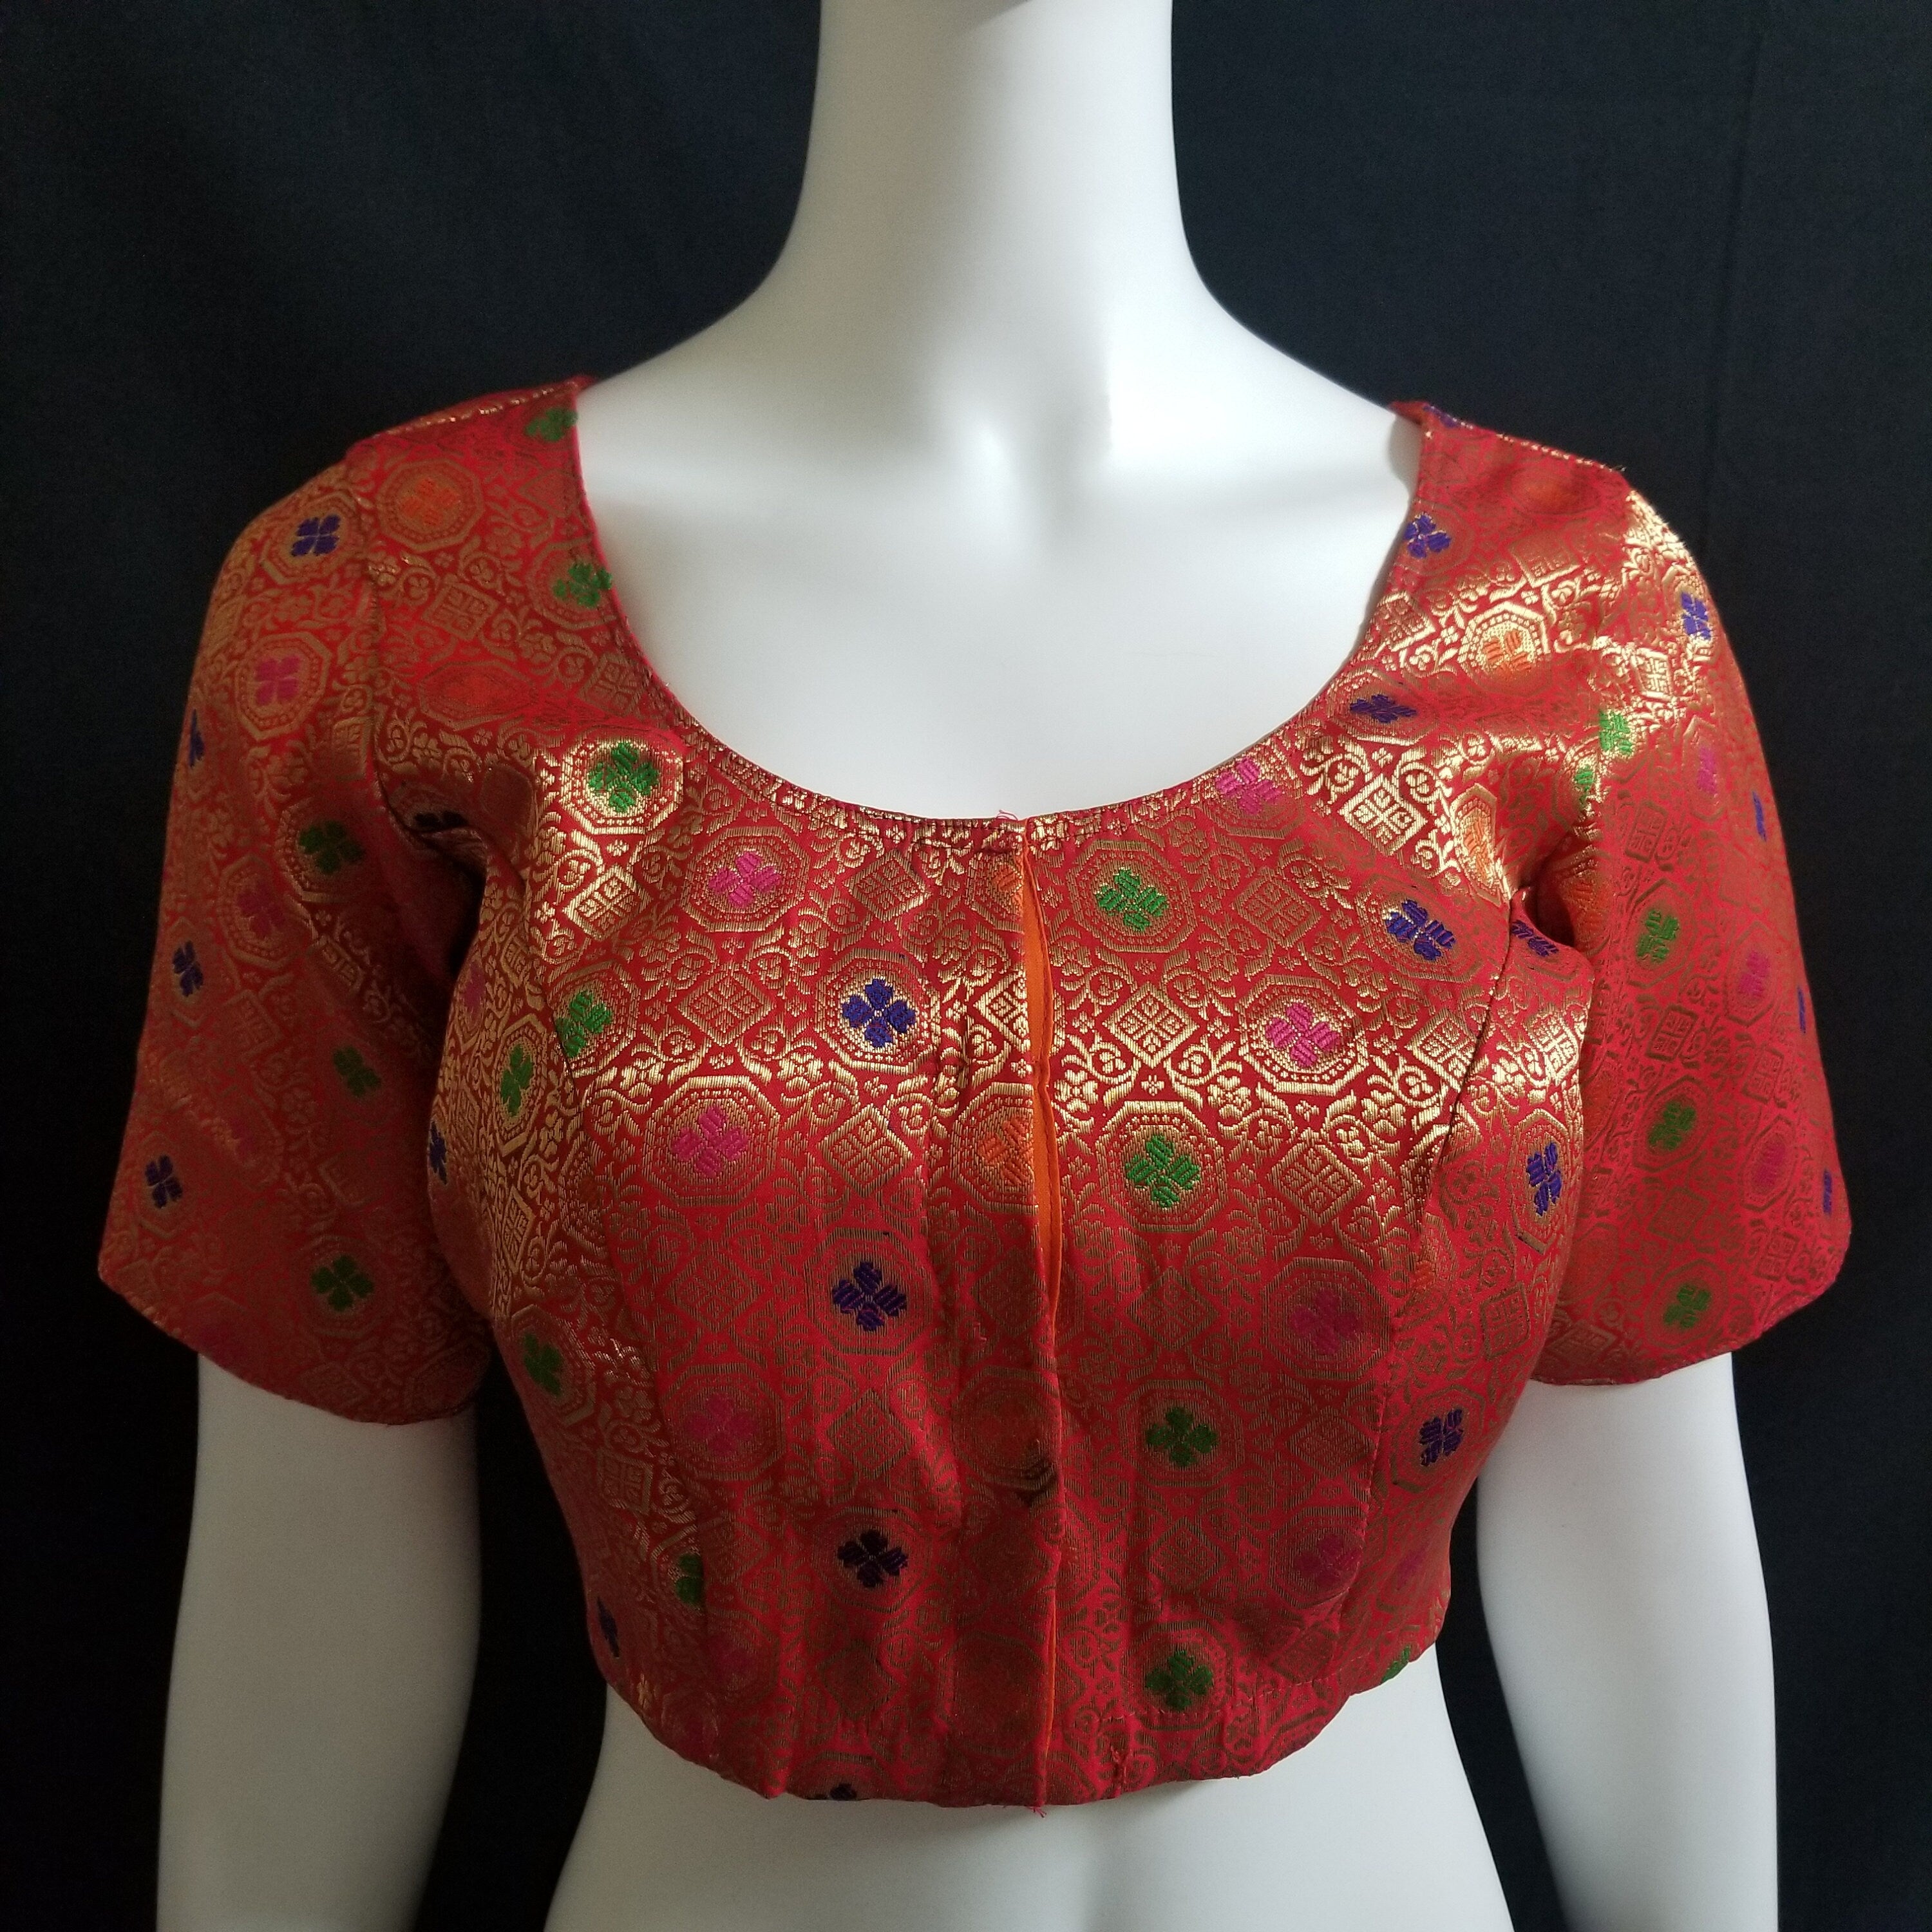 Readymade Saree Blouse - Red Silk with gold and multi-color Blouse - Princess cut padded - size 38" (alter 36", 40", 42")